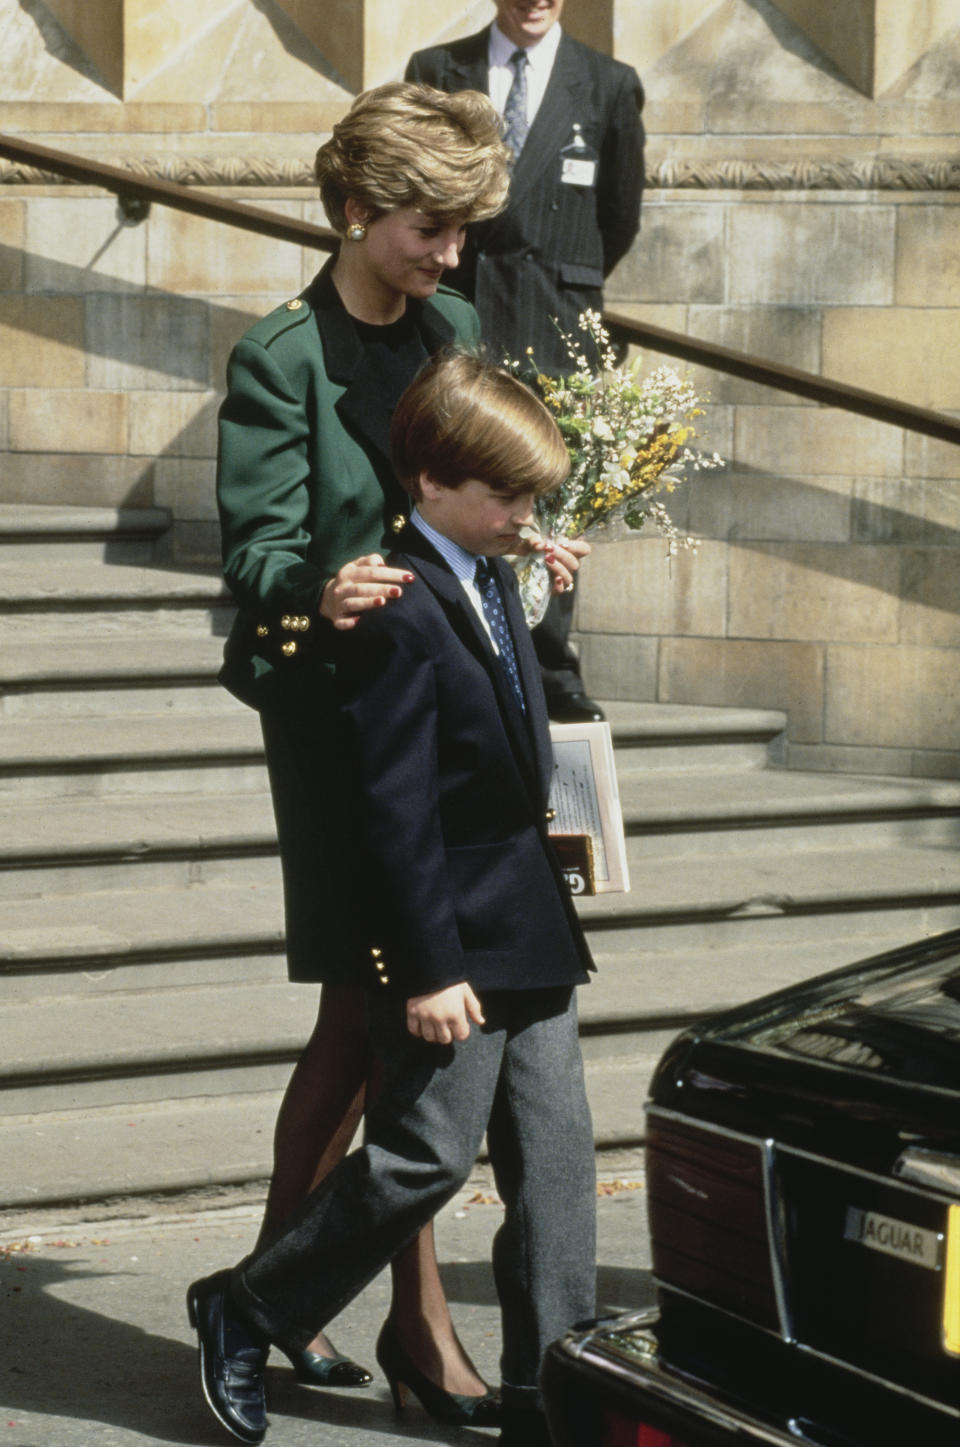 Diana, Princess of Wales  (1961 - 1997) and Prince William visit the Natural History Museum in London, April 1992. Diana is wearing a green suit by Moschino. (Photo by Princess Diana Archive/Getty Images)